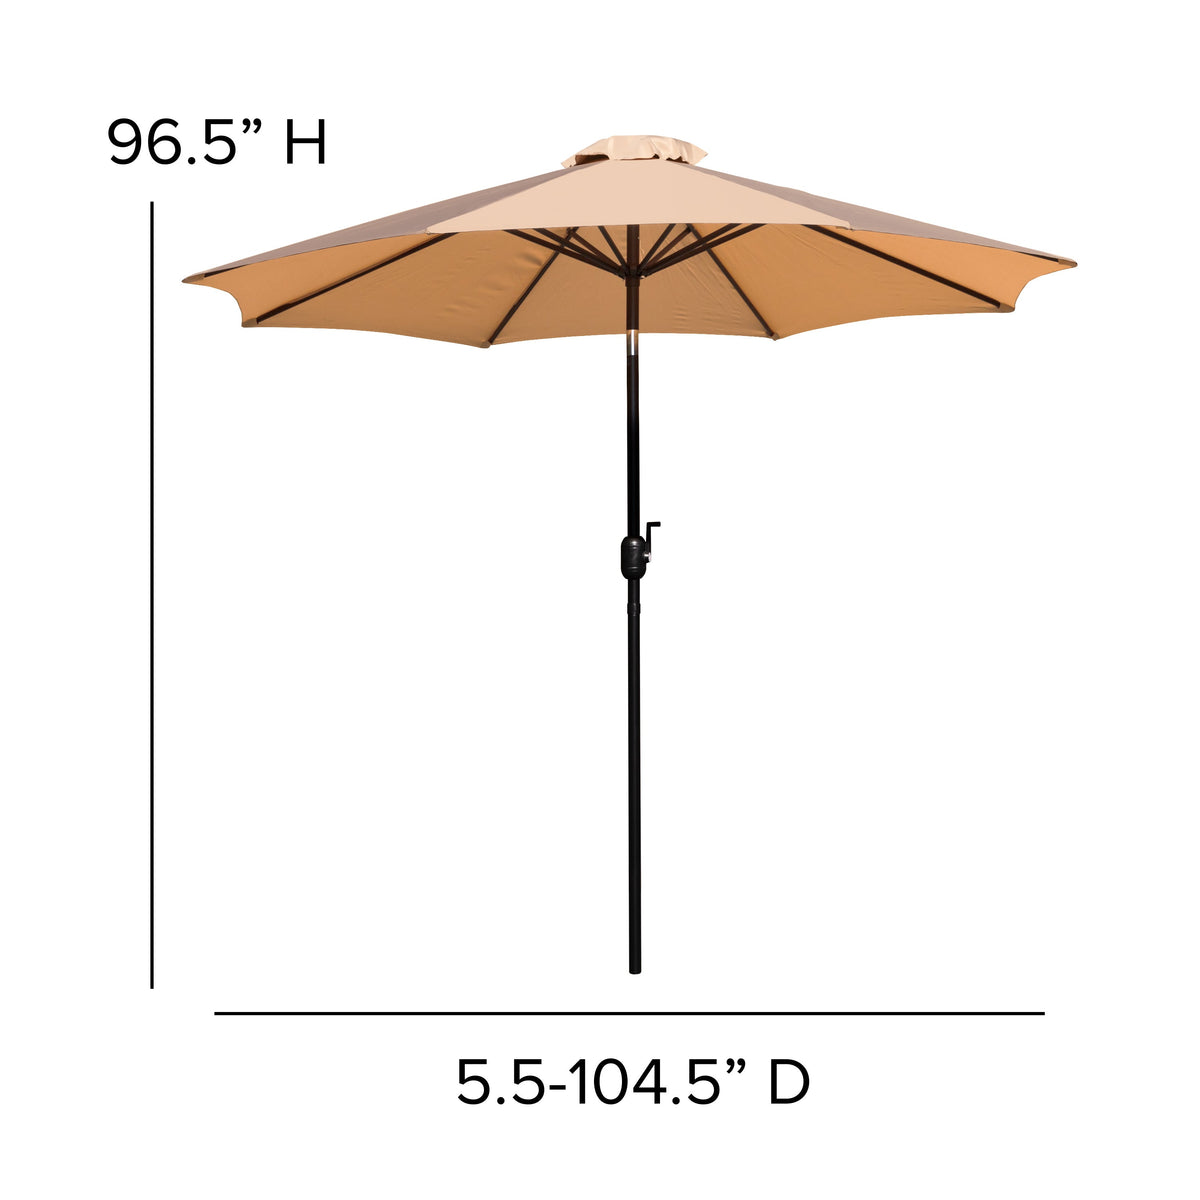 Tan |#| Faux Teak 35inch Square Patio Table, 2 Chairs & Tan 9FT Patio Umbrella with Base